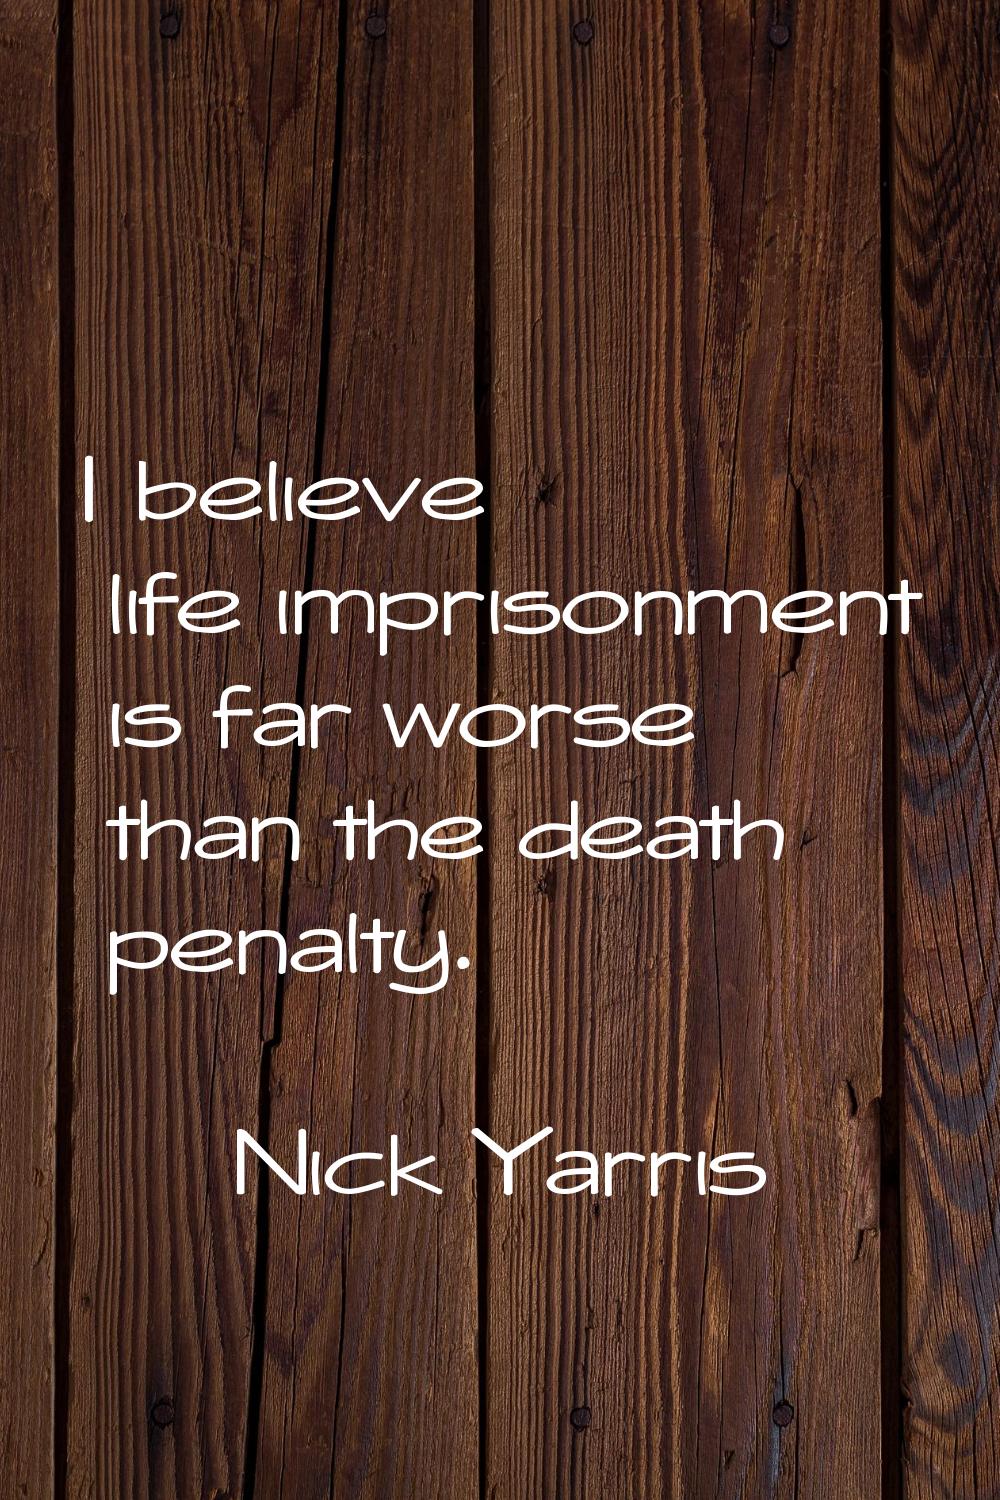 I believe life imprisonment is far worse than the death penalty.